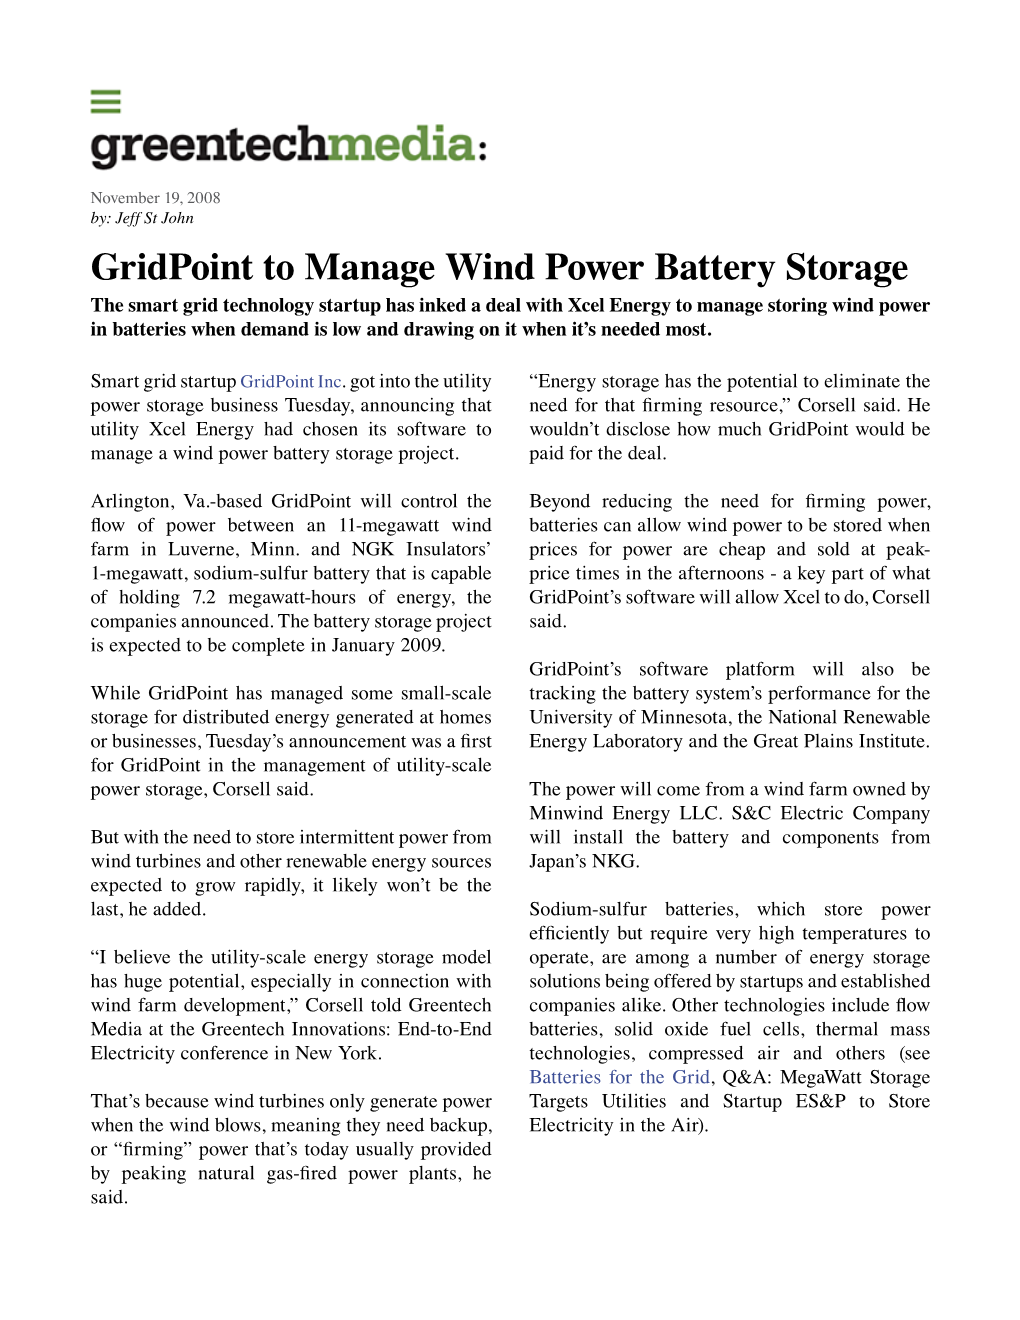 Gridpoint to Manage Wind Power Battery Storage